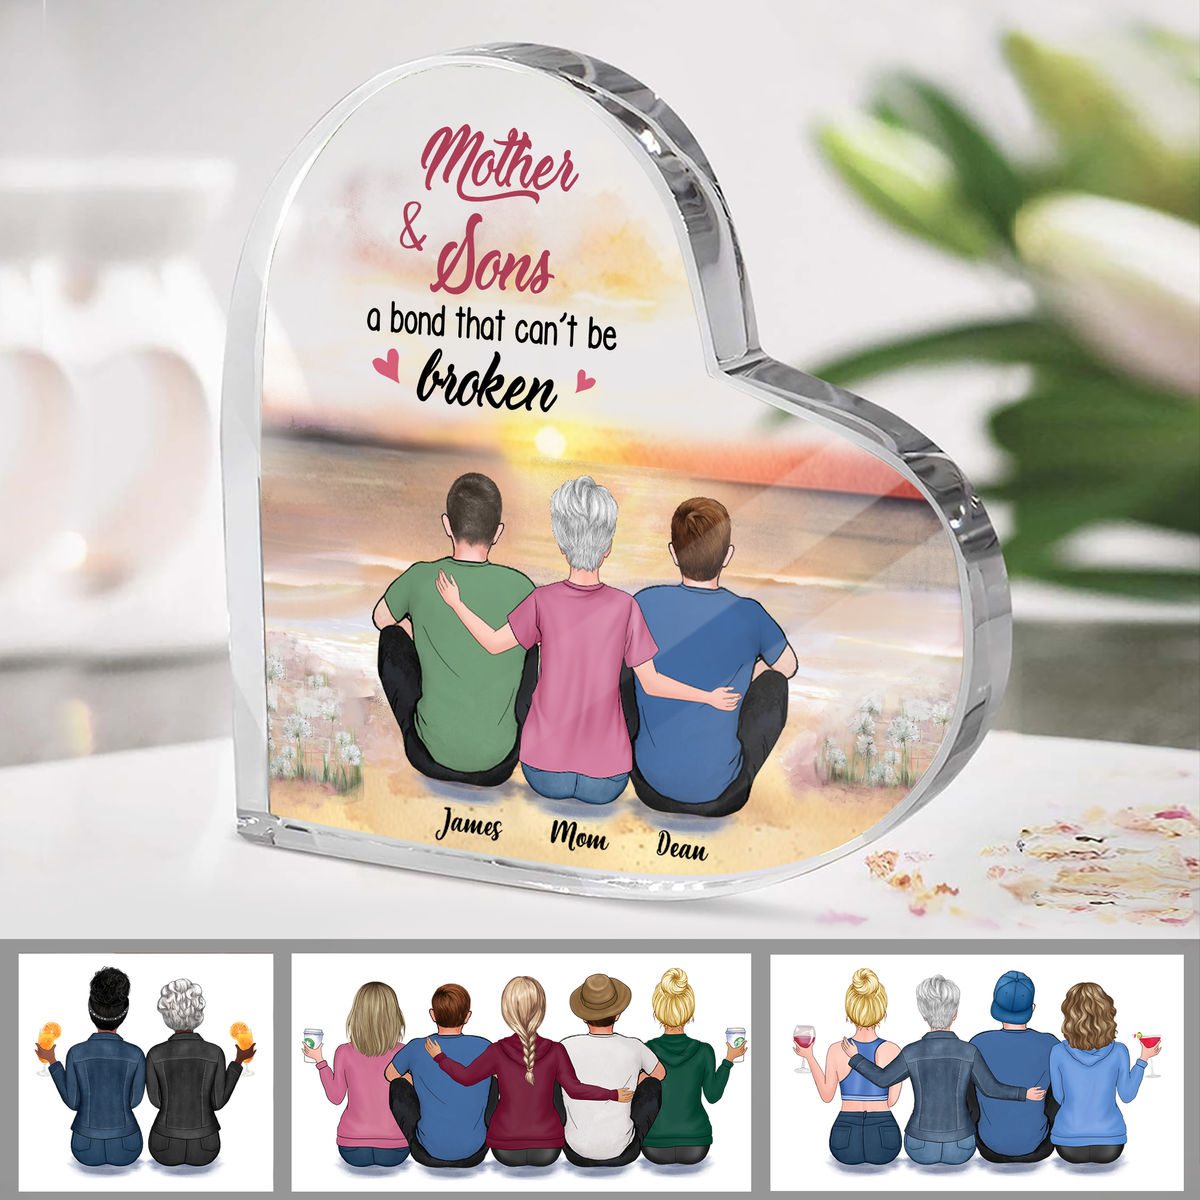 Personalized Desktop - Mother & Sons - Mother and Sons a Bond that Can't be Broken - v3_1